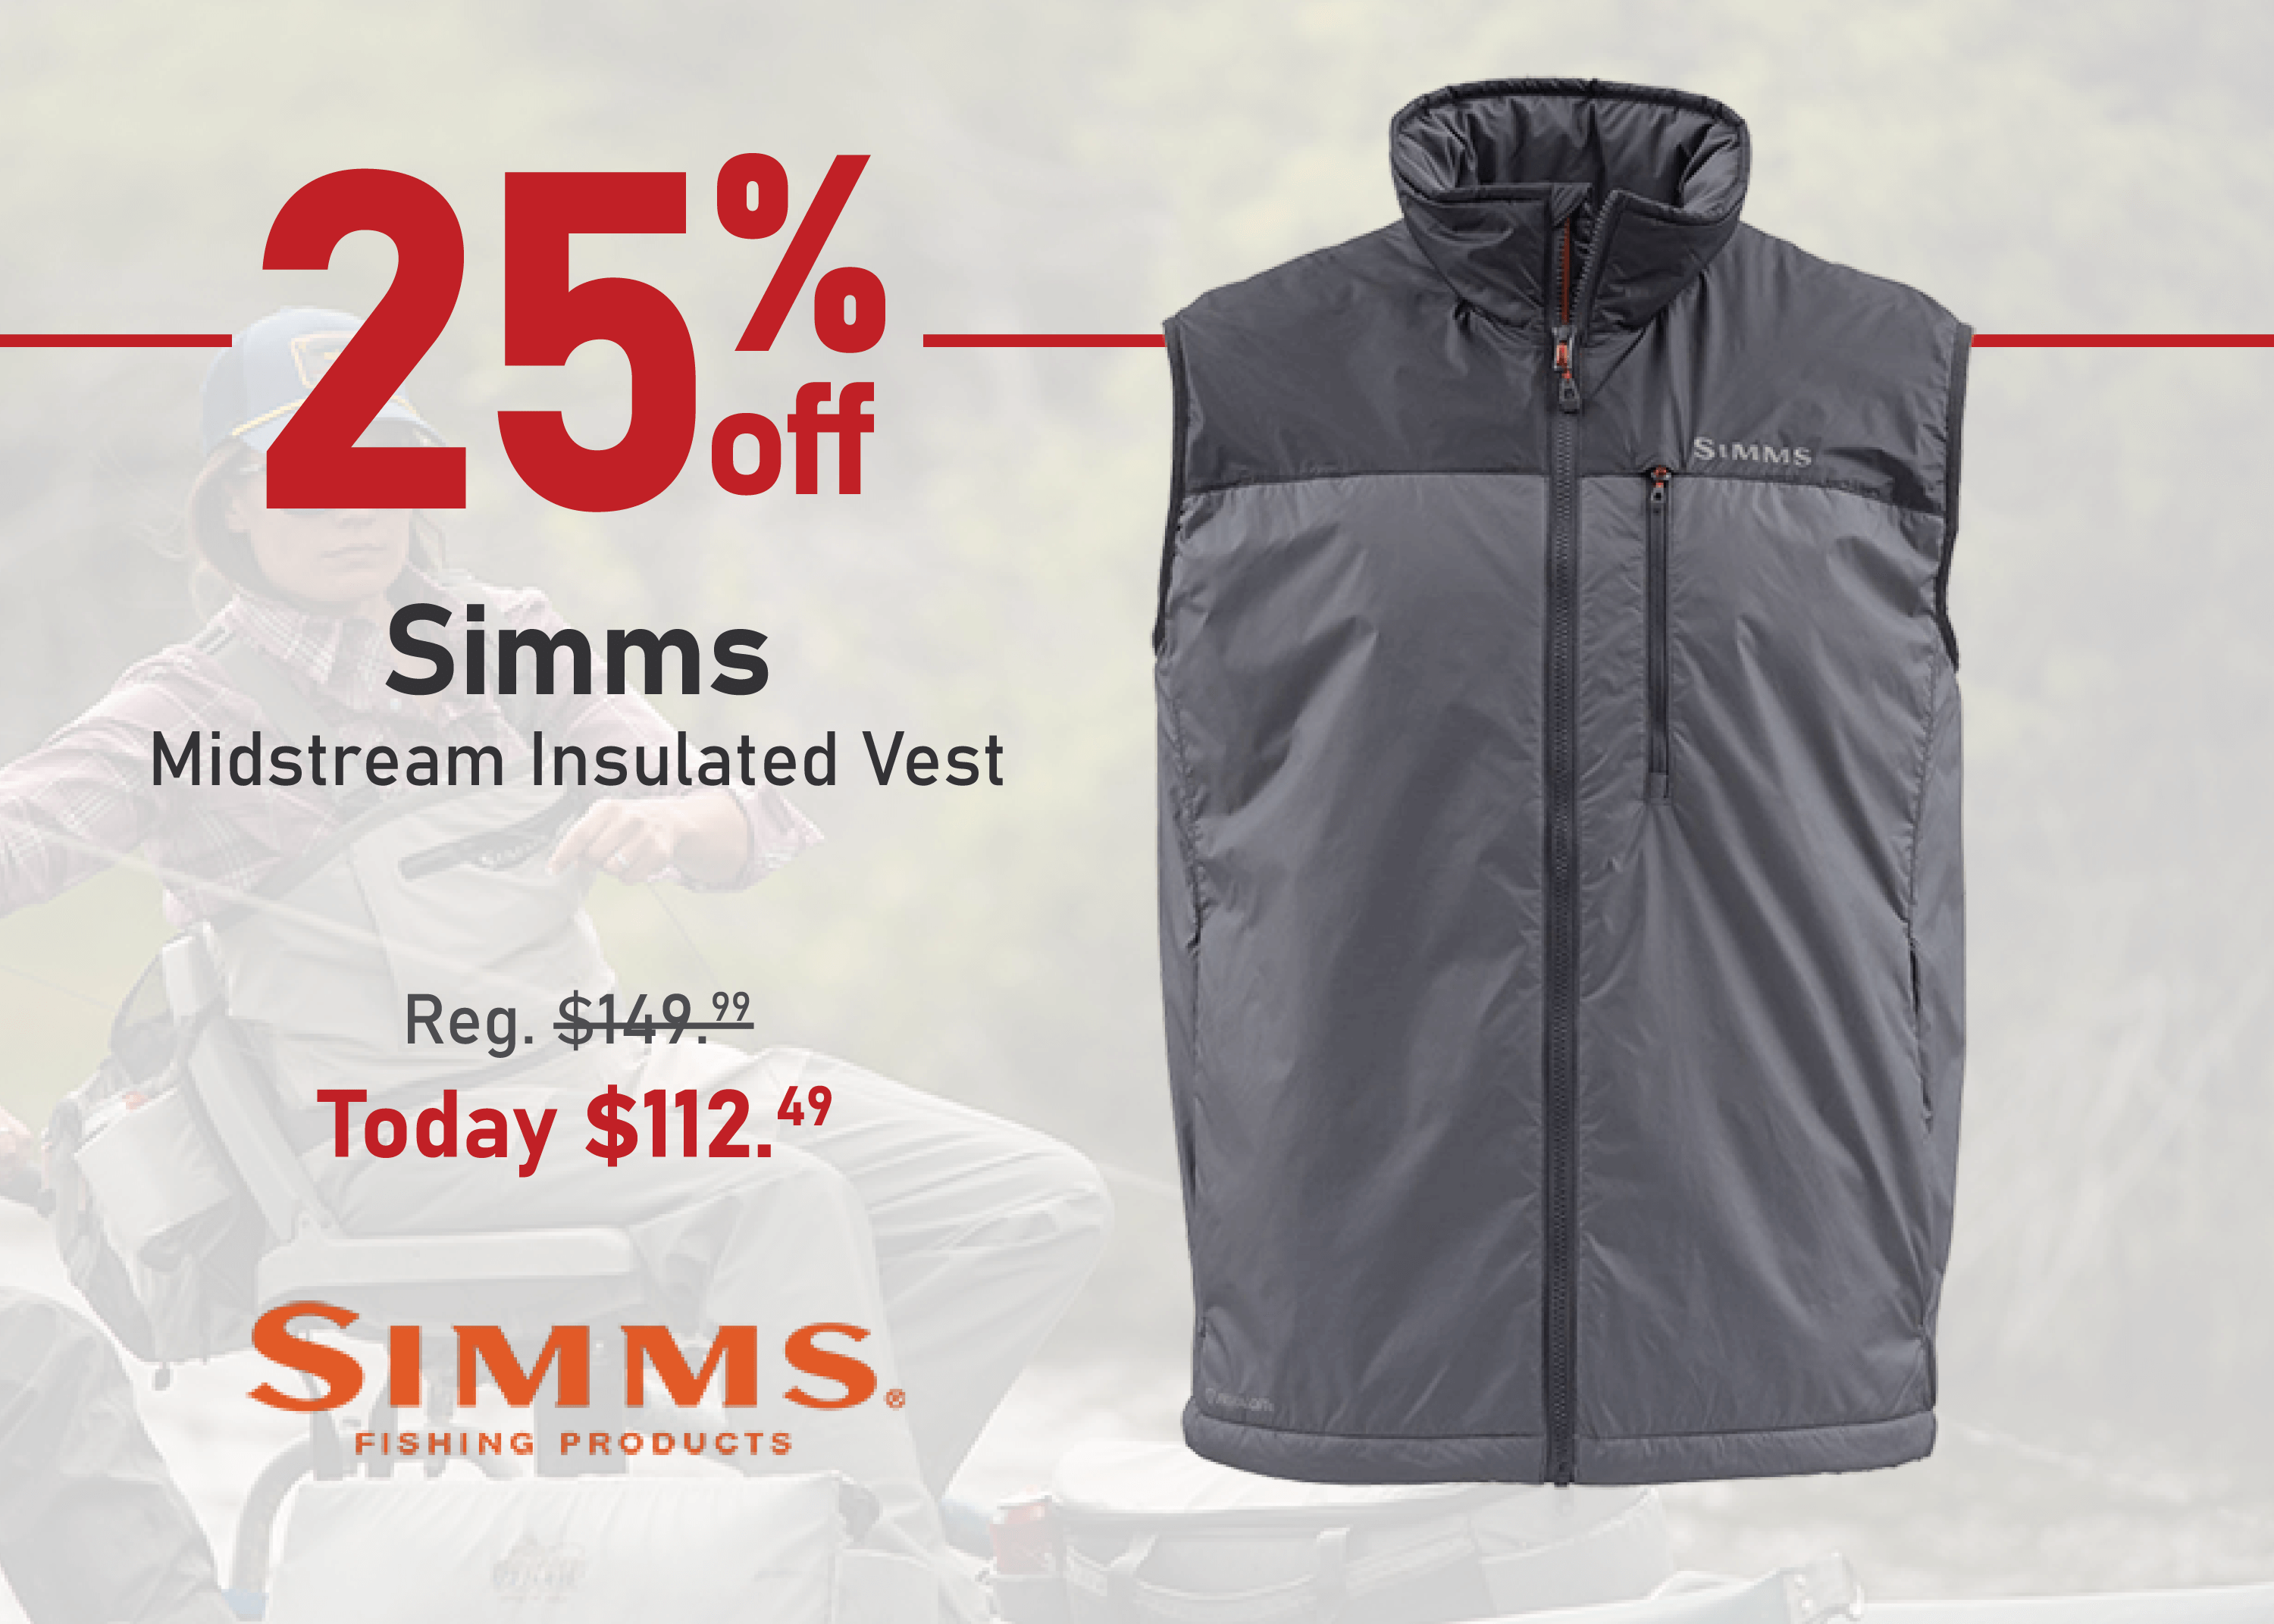 Save 25% on the Simms Midstream Insulated Vest